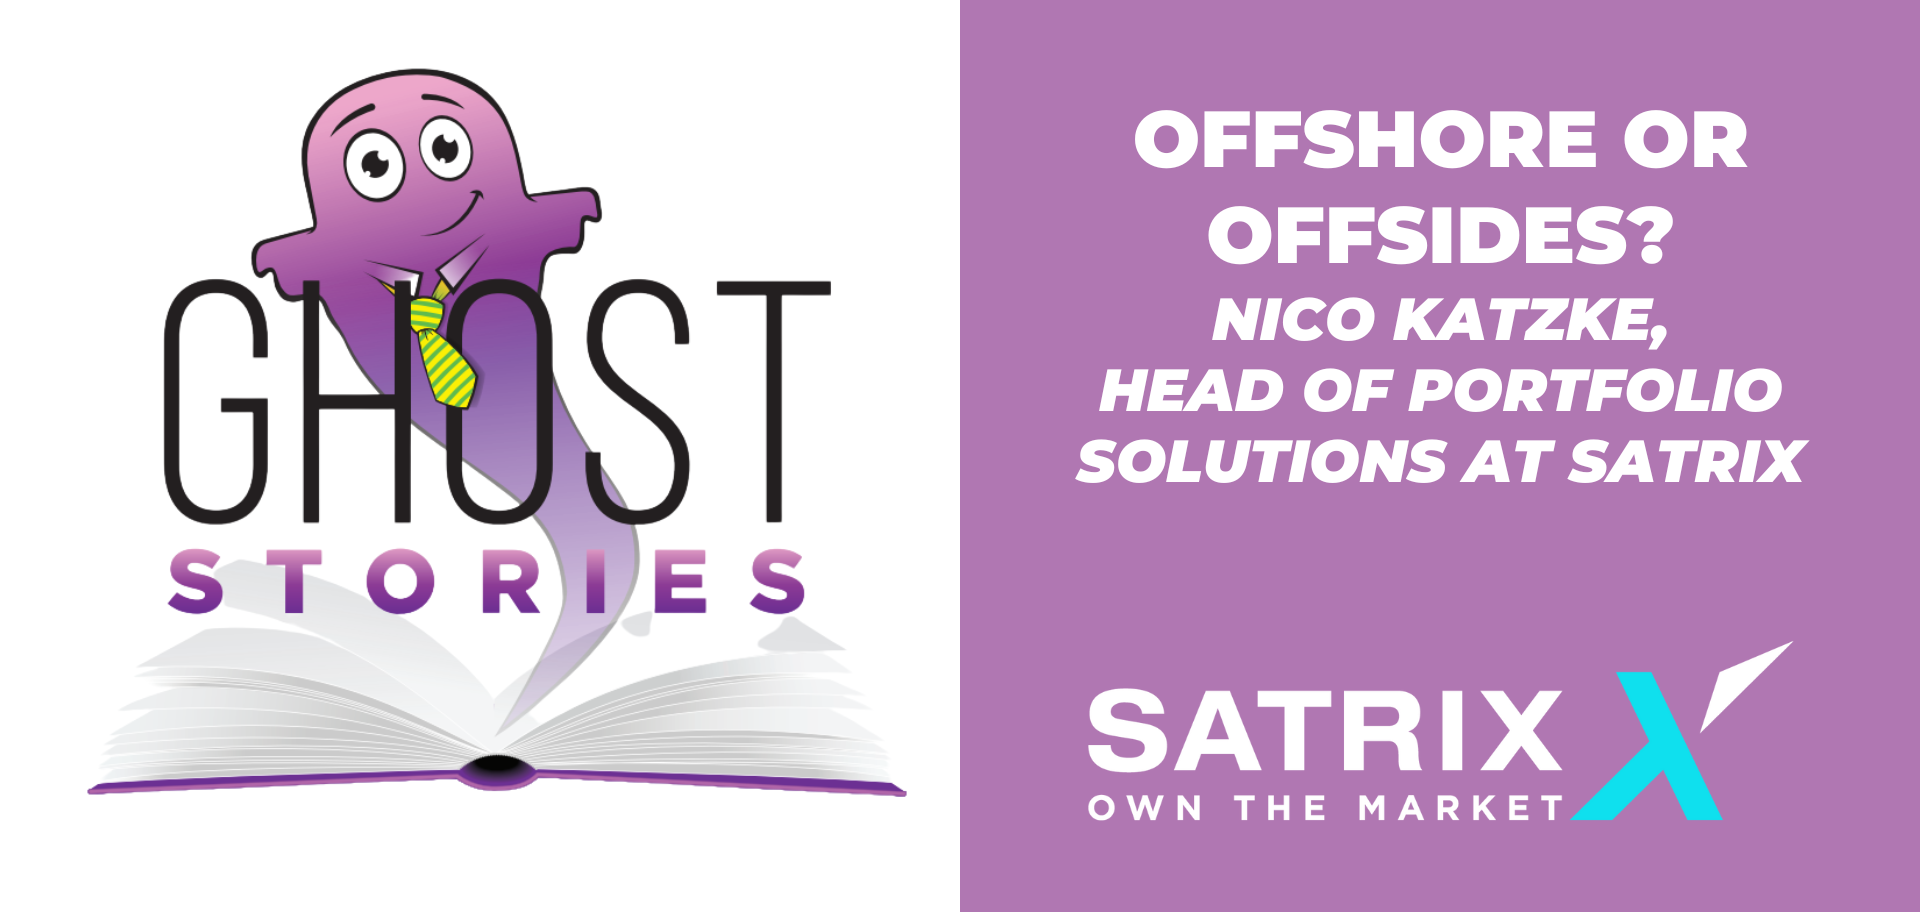 Ghost Stories #13: Offshore or Offsides? Objectively Assessing Exposure with Nico Katzke (Head of Portfolio Solutions at Satrix)